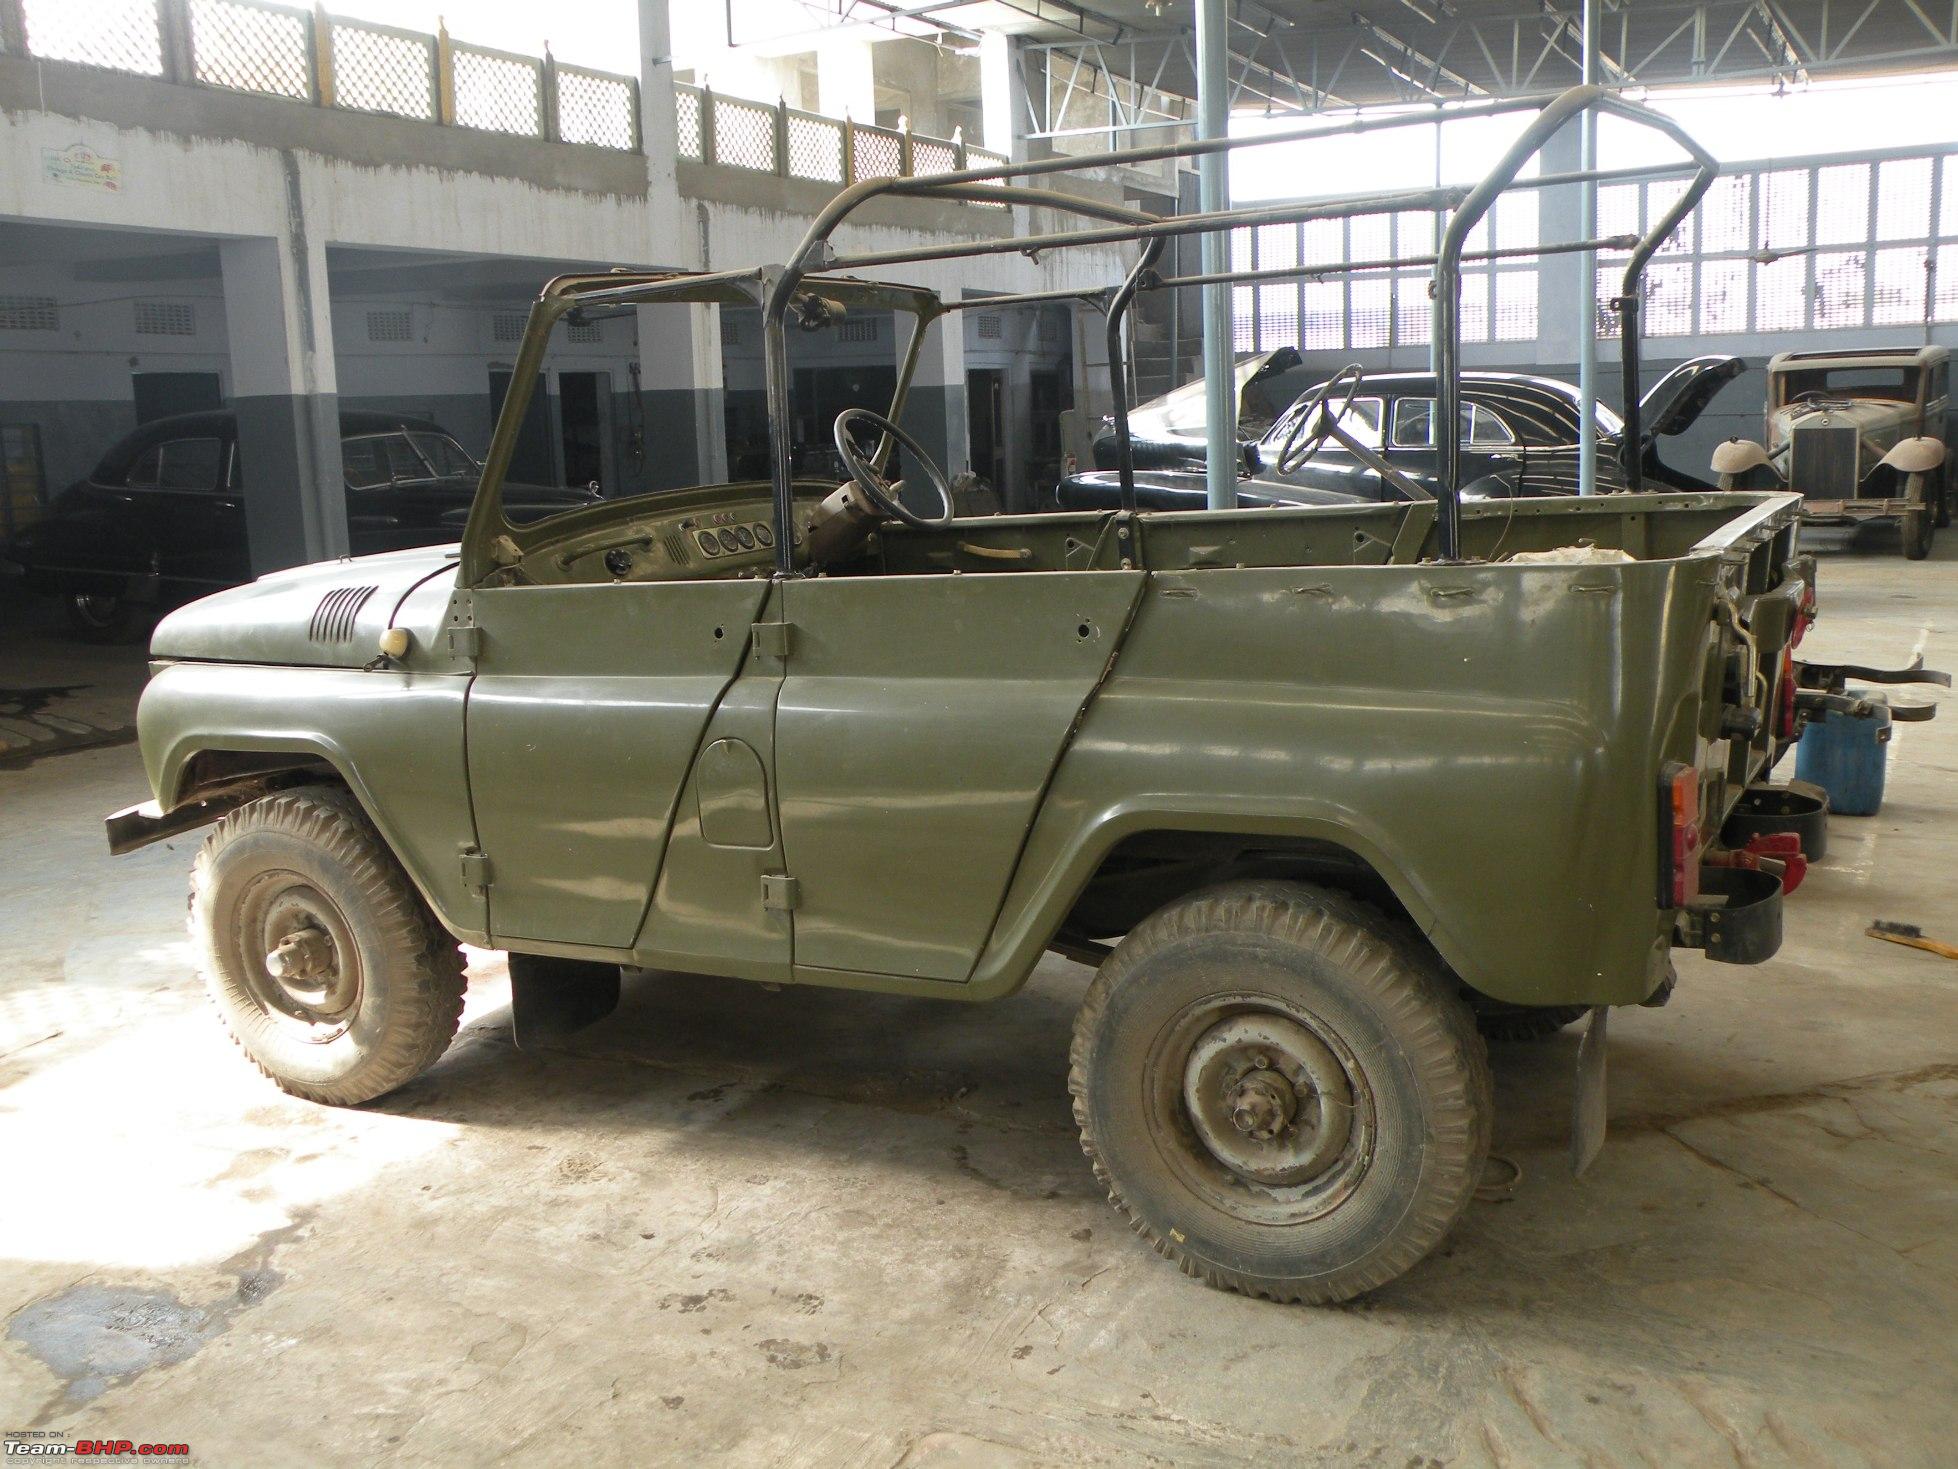 Russian Uaz-469, Ford and a Willy's - Team-